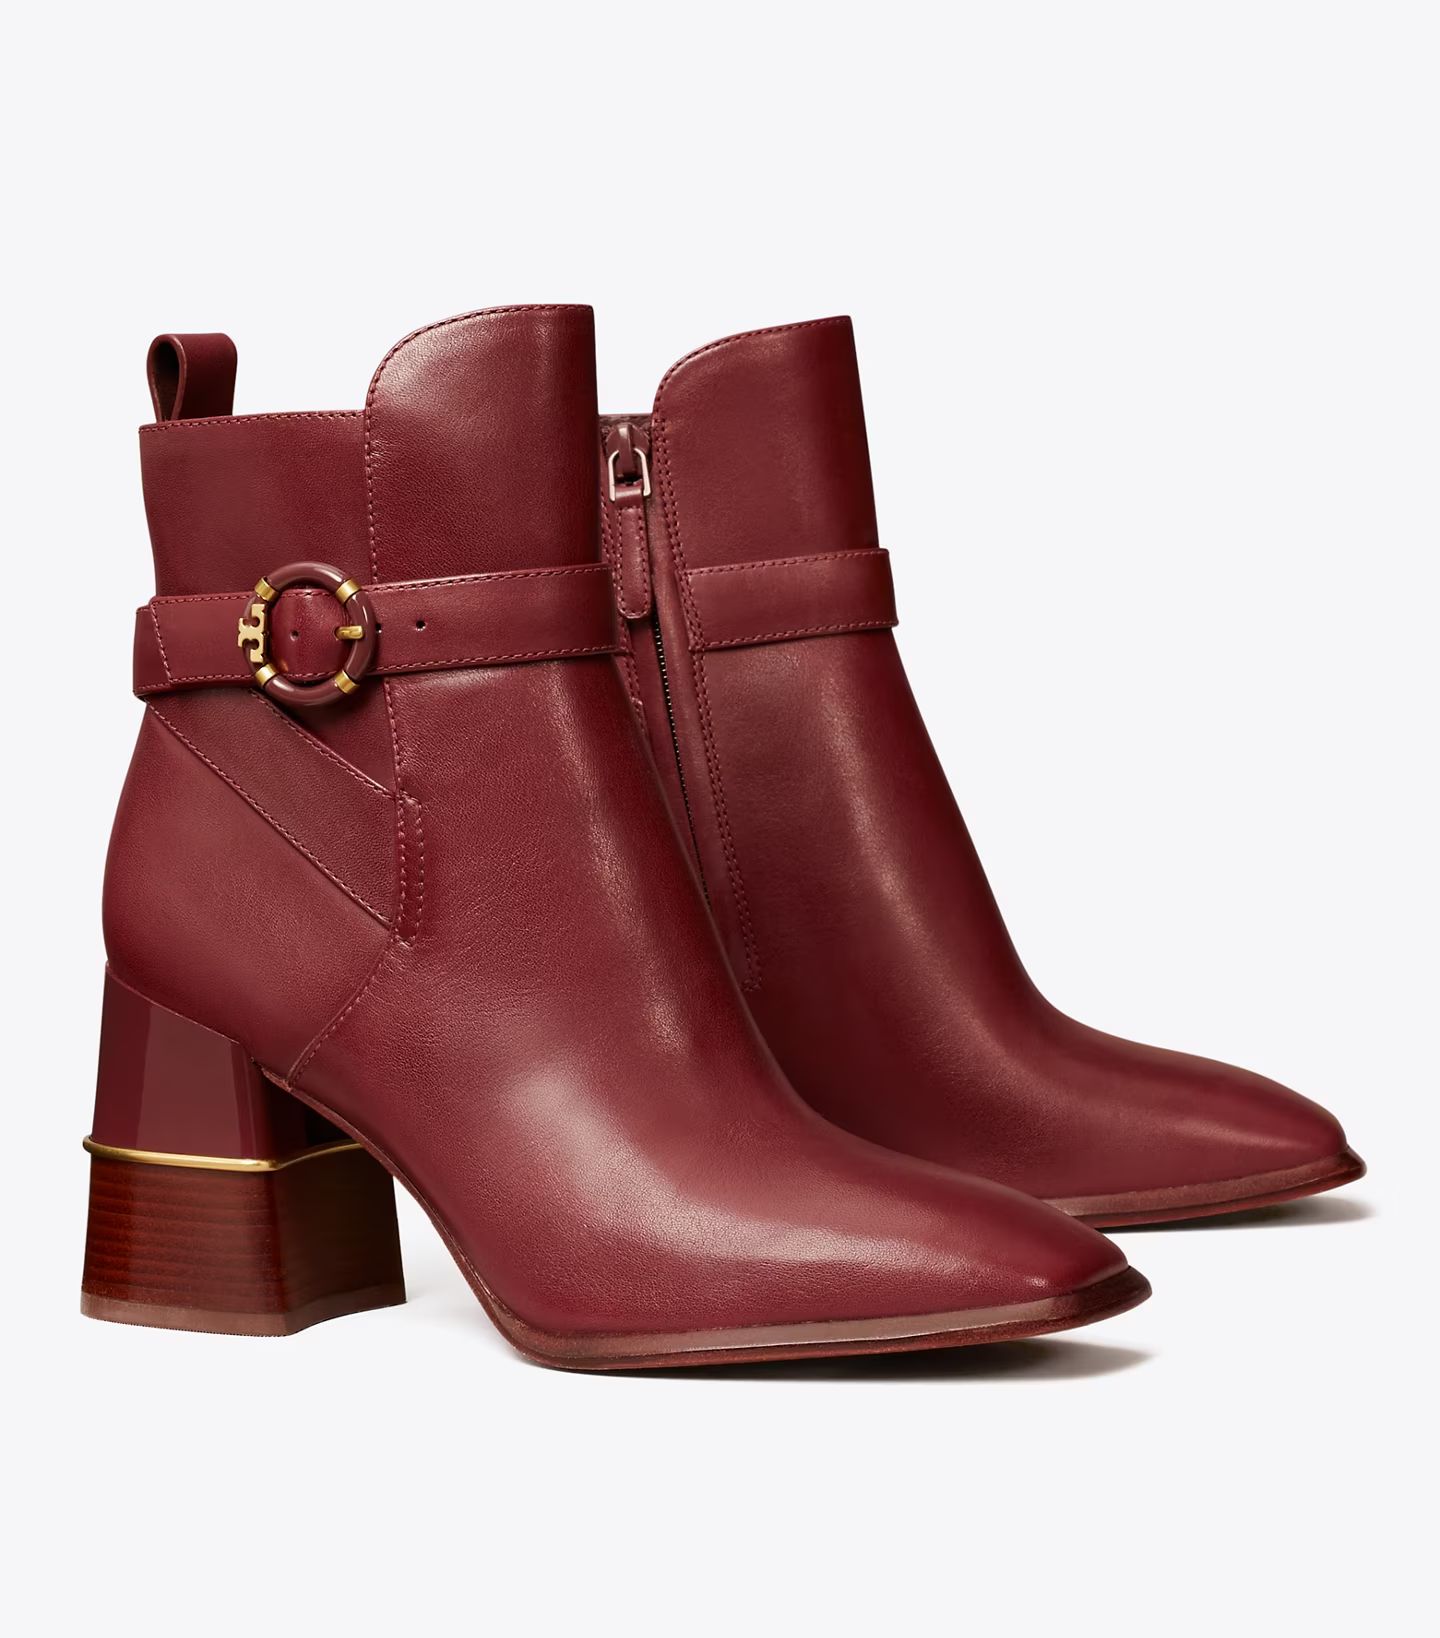 Multi-Logo Buckle Boot: Women's Designer Ankle Boots | Tory Burch | Tory Burch (US)